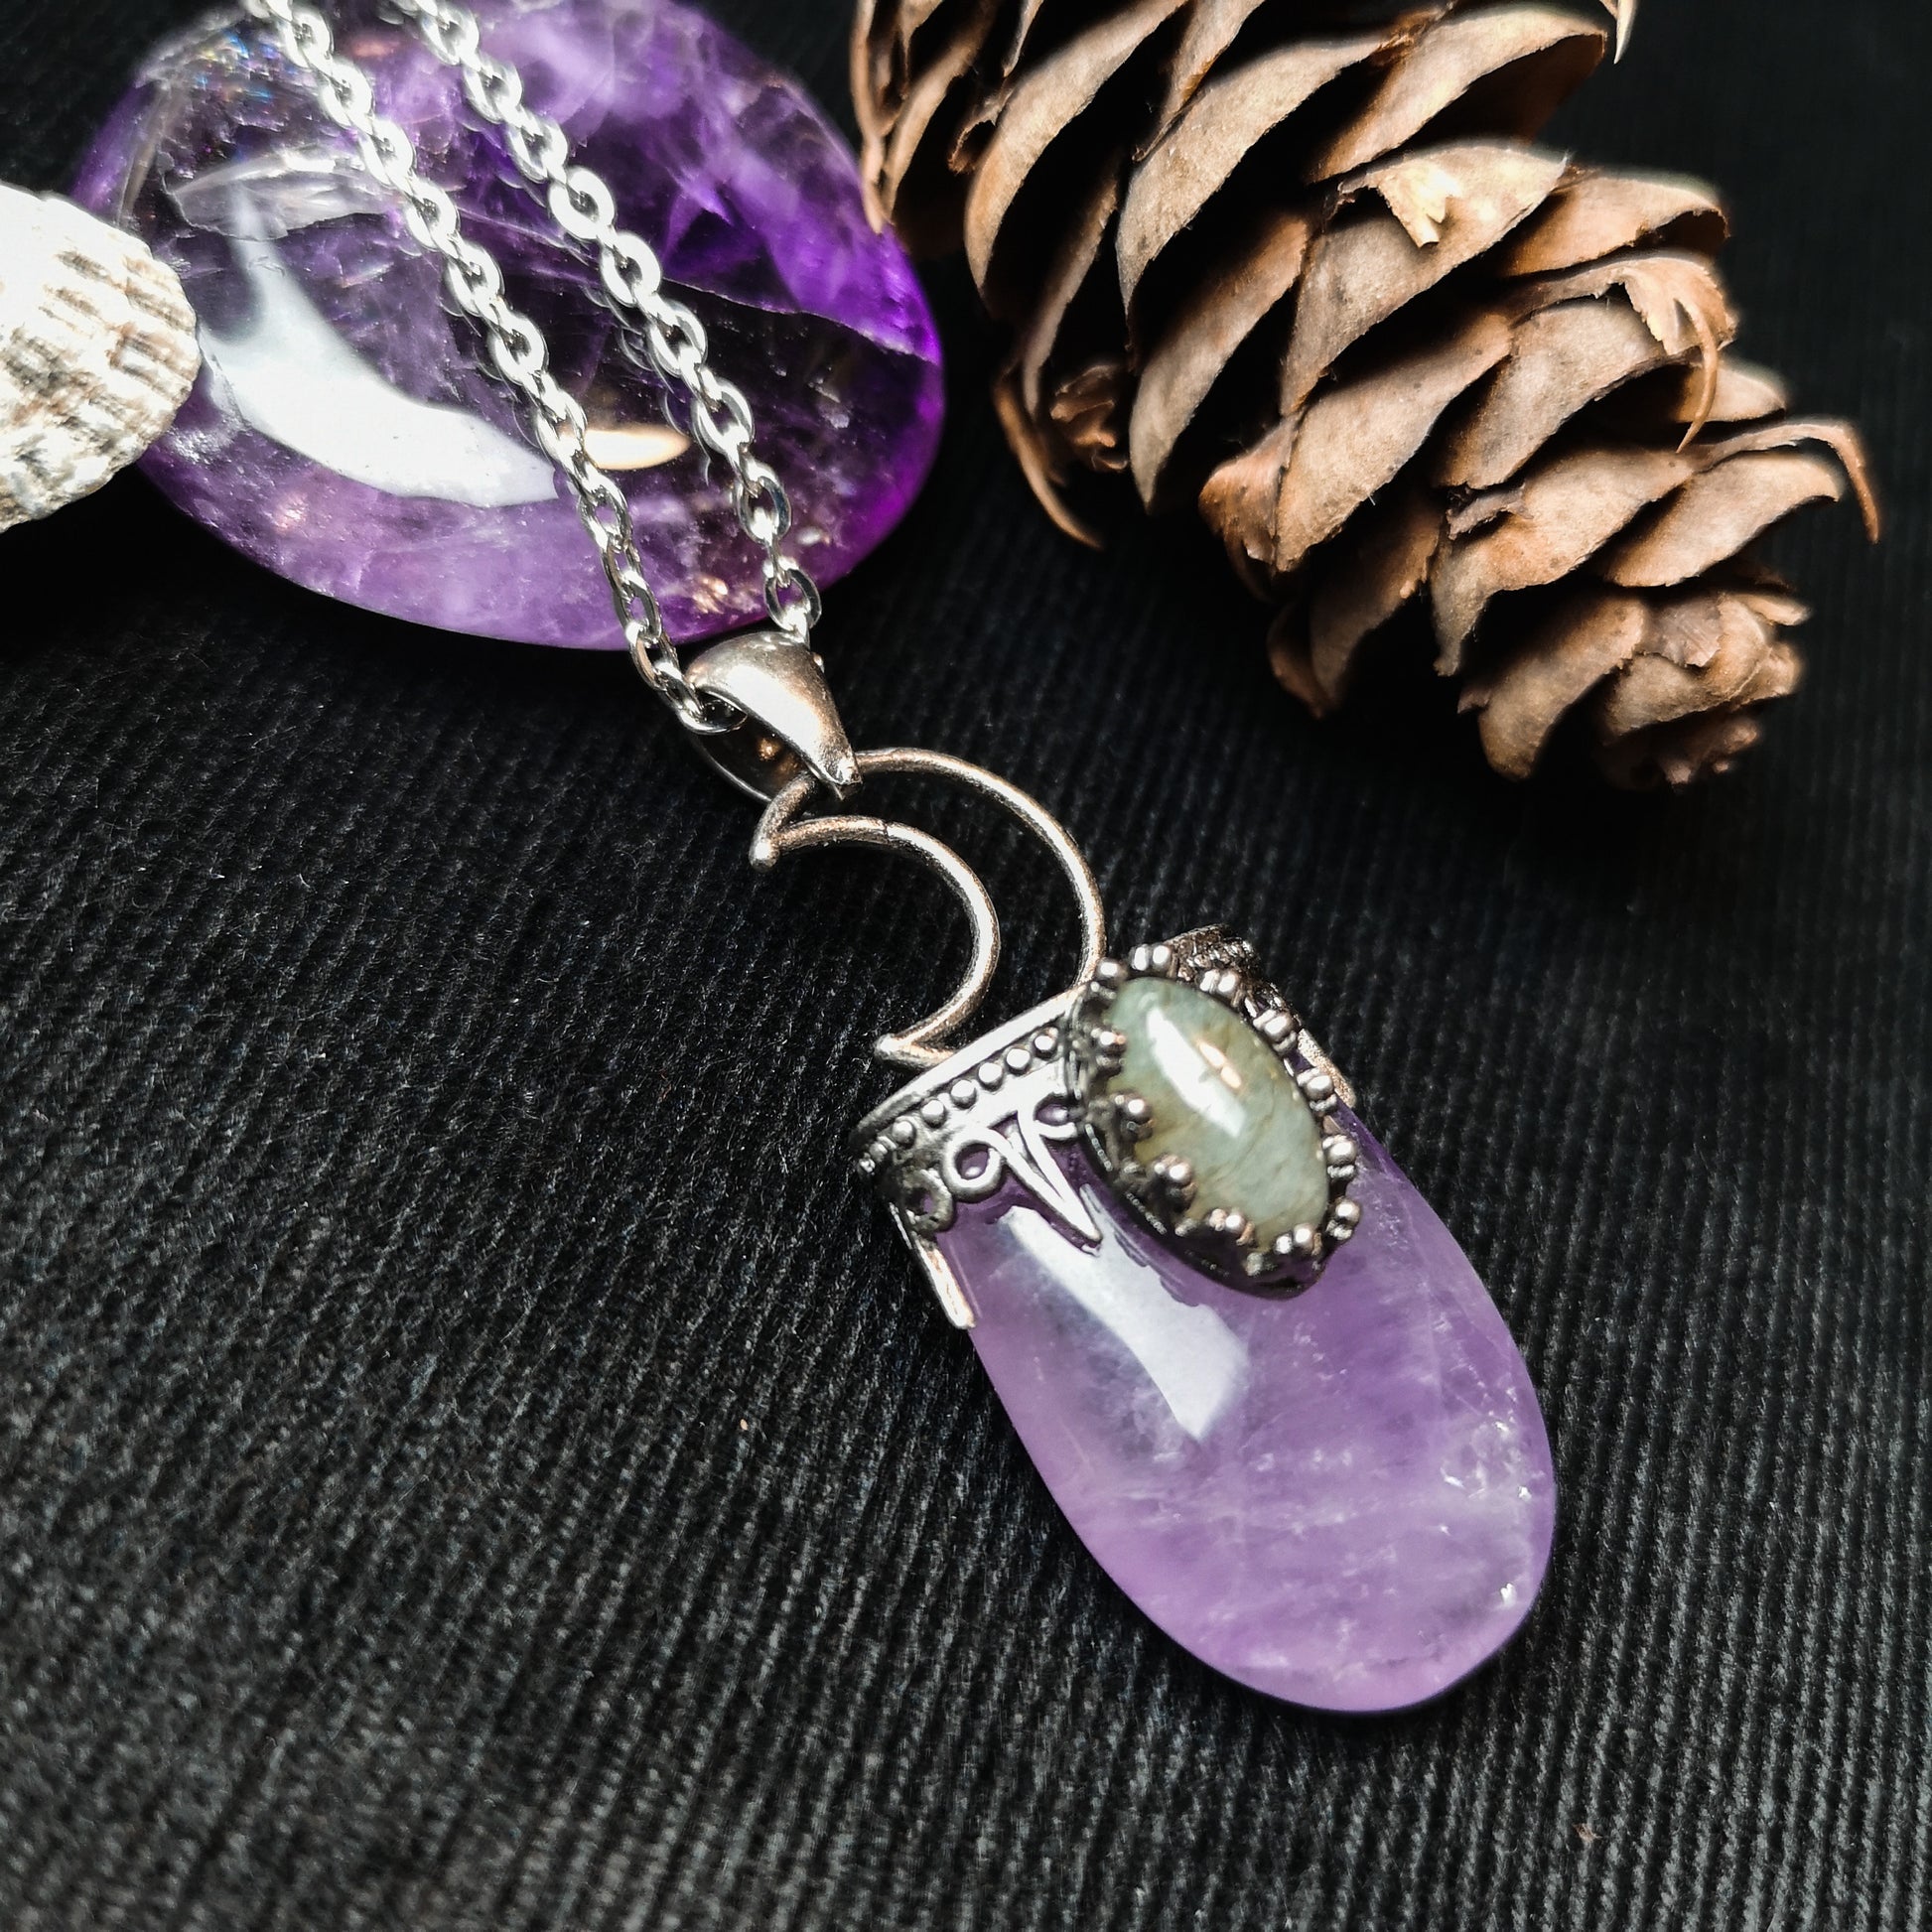 Crescent moon amethyst and labradorite witchy necklace - The French Witch shop